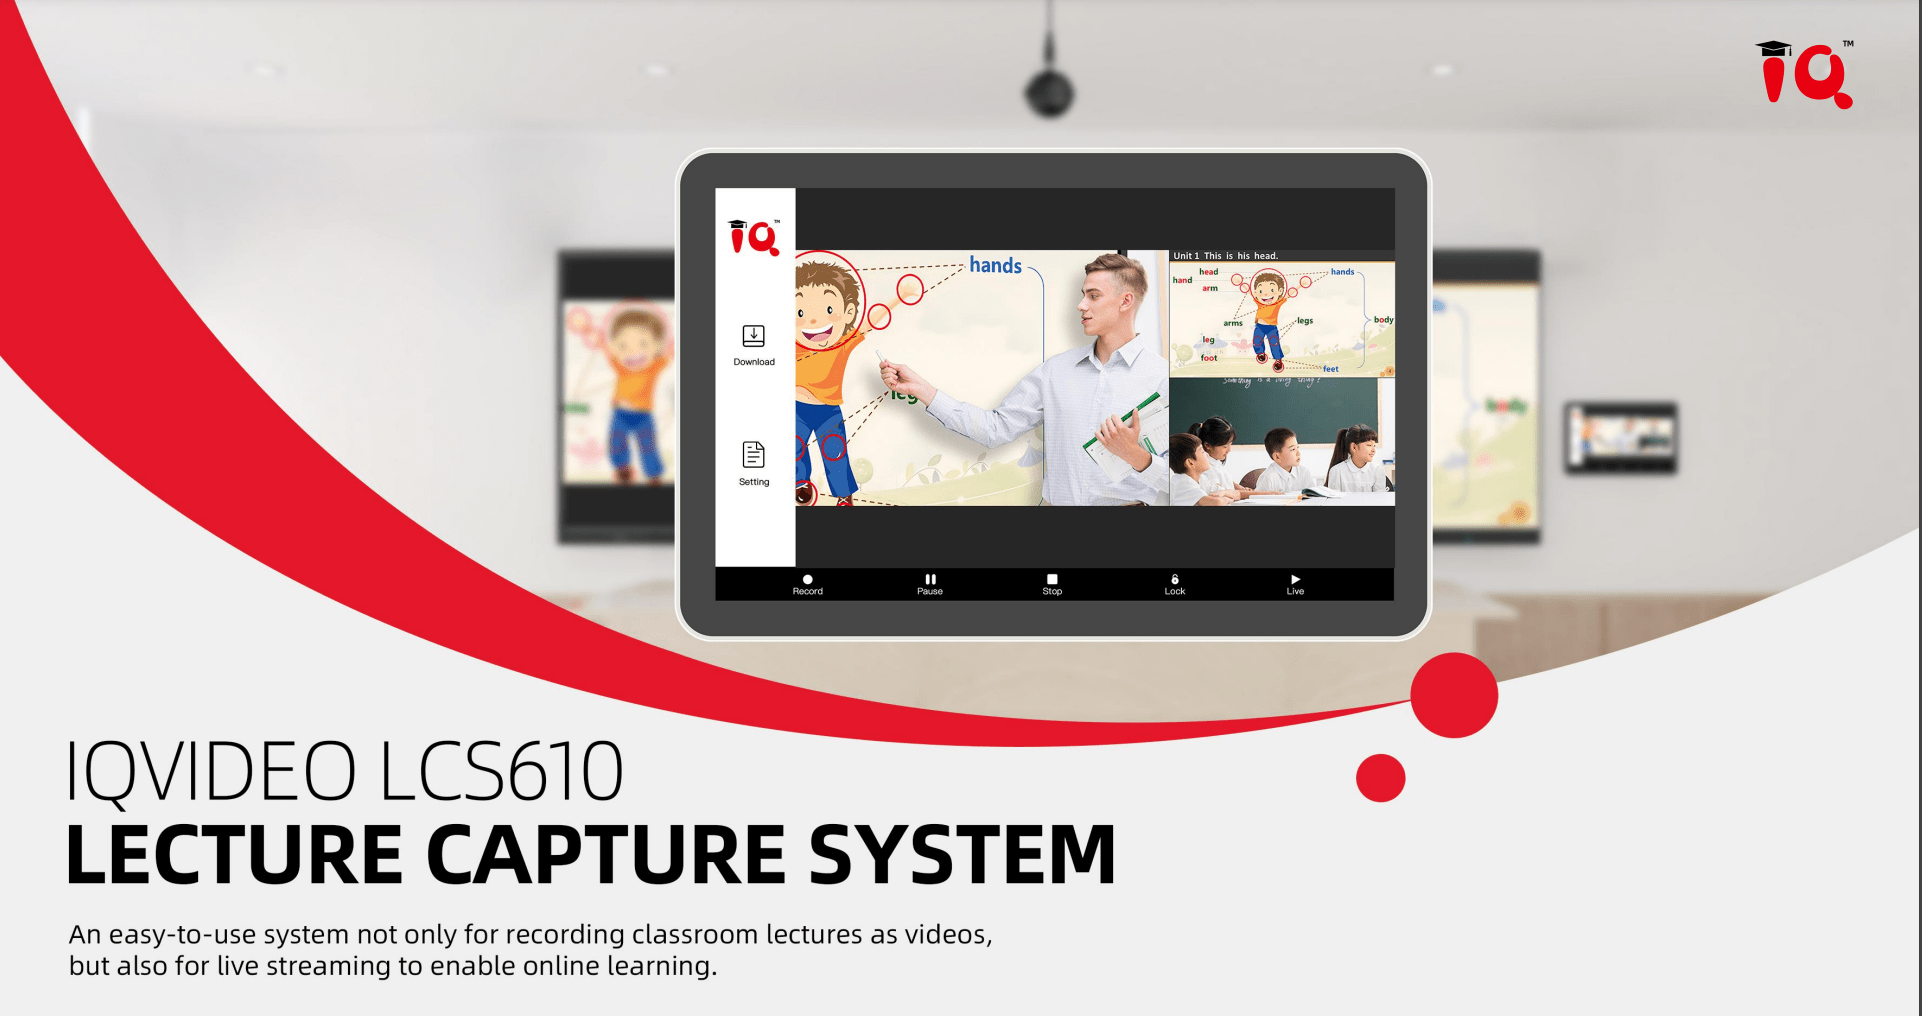 Lecture Capture System supply by C.T.Technology (PG) Sdn Bhd